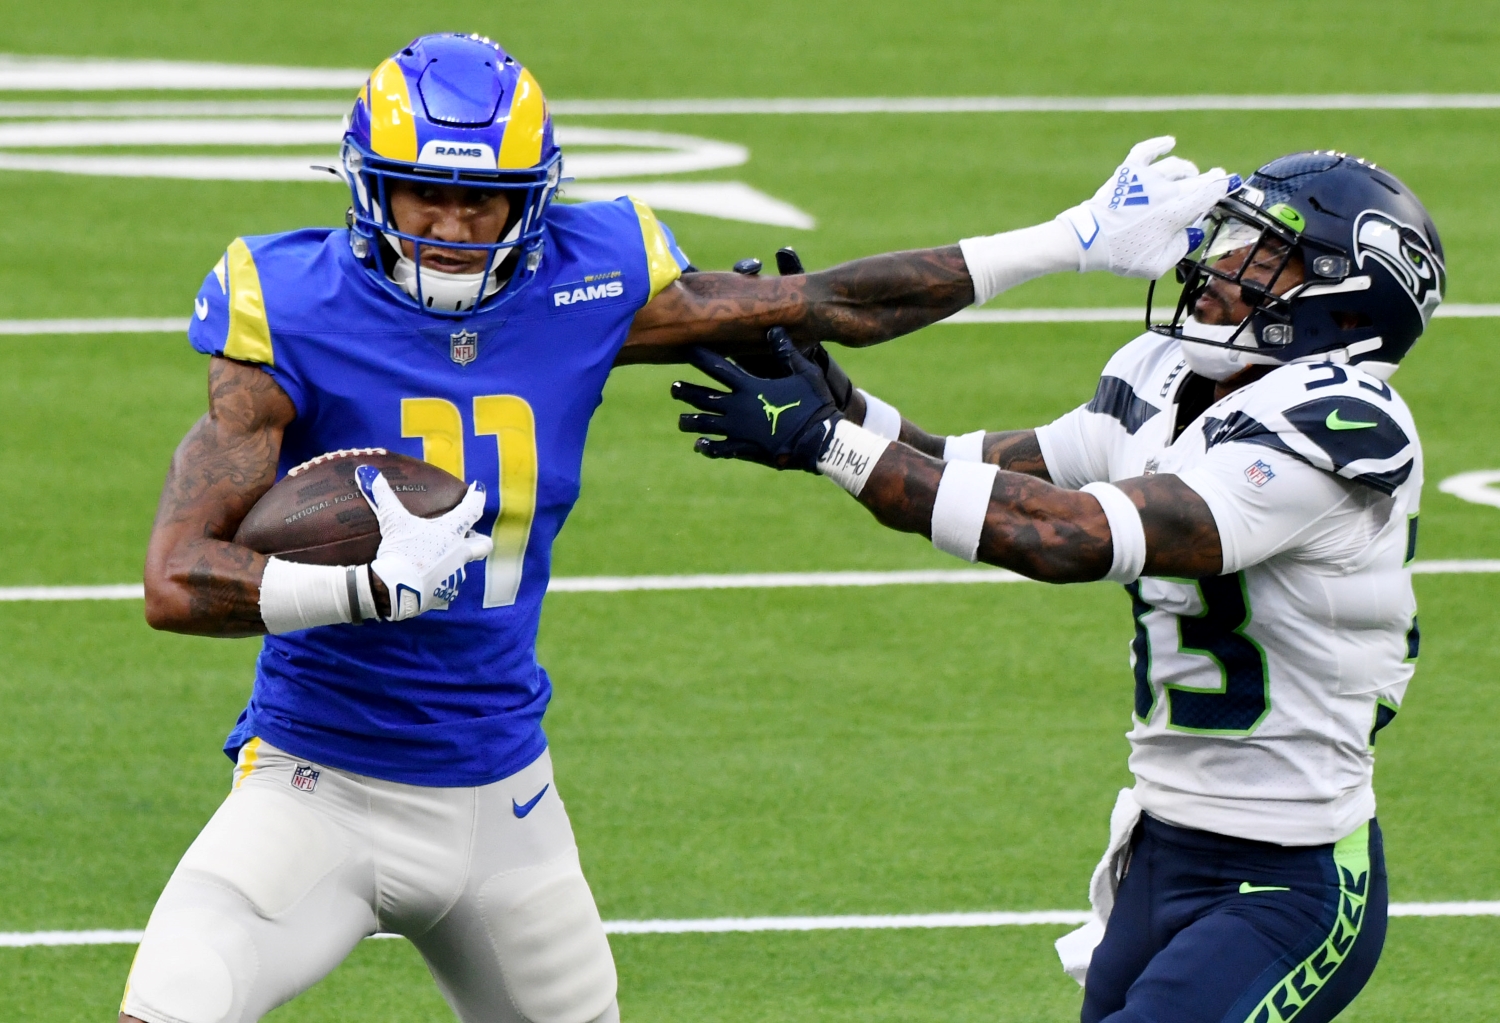 Los Angeles Rams receiver Josh Reynolds stiff arms Seattle Seahawks safety Jamal Adams during a tackle attempt.